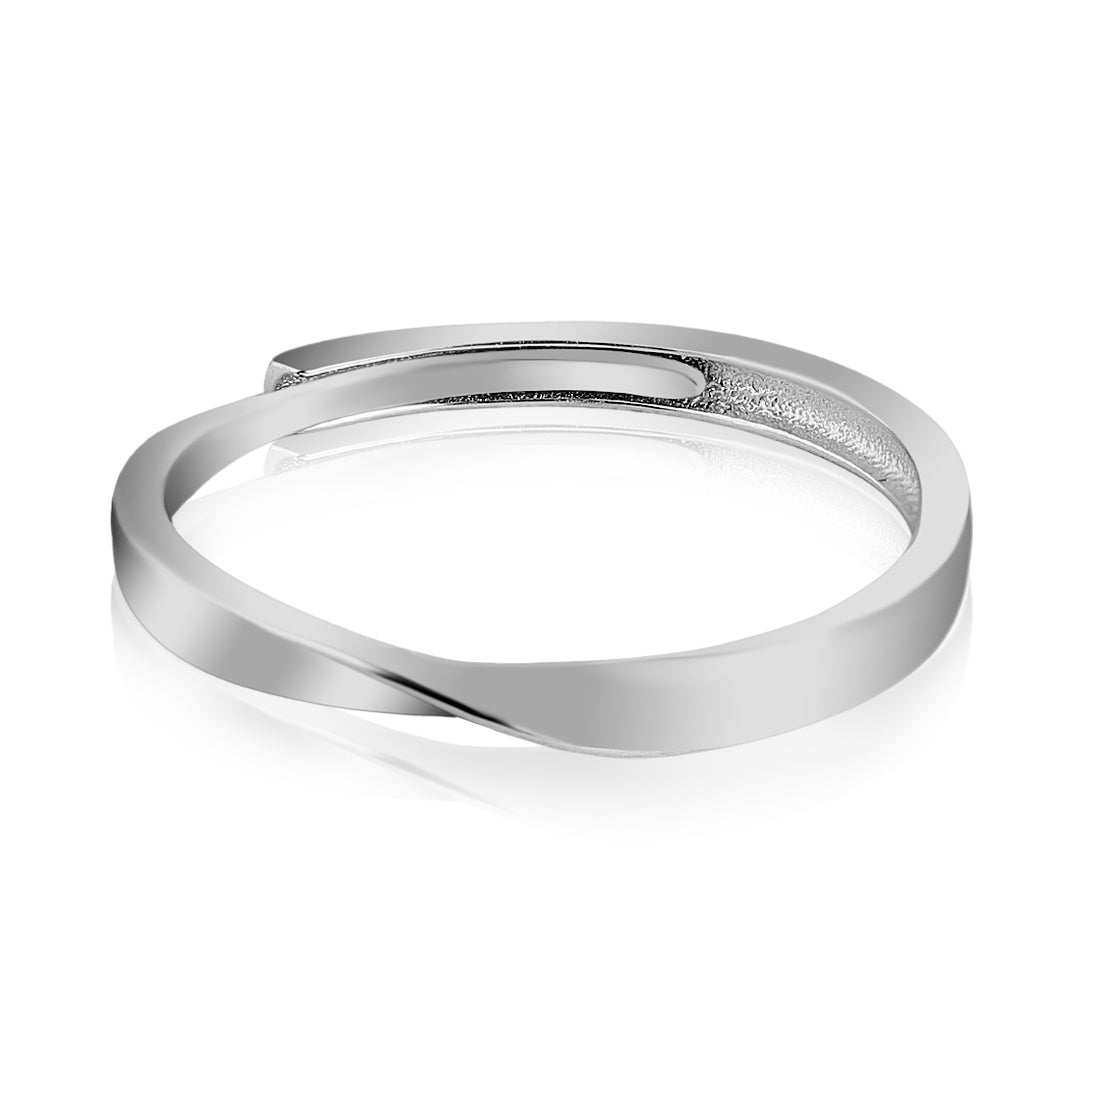 Cut Class Rhodium Plated 925 Sterling Silver Ring For Him (Adjustable)